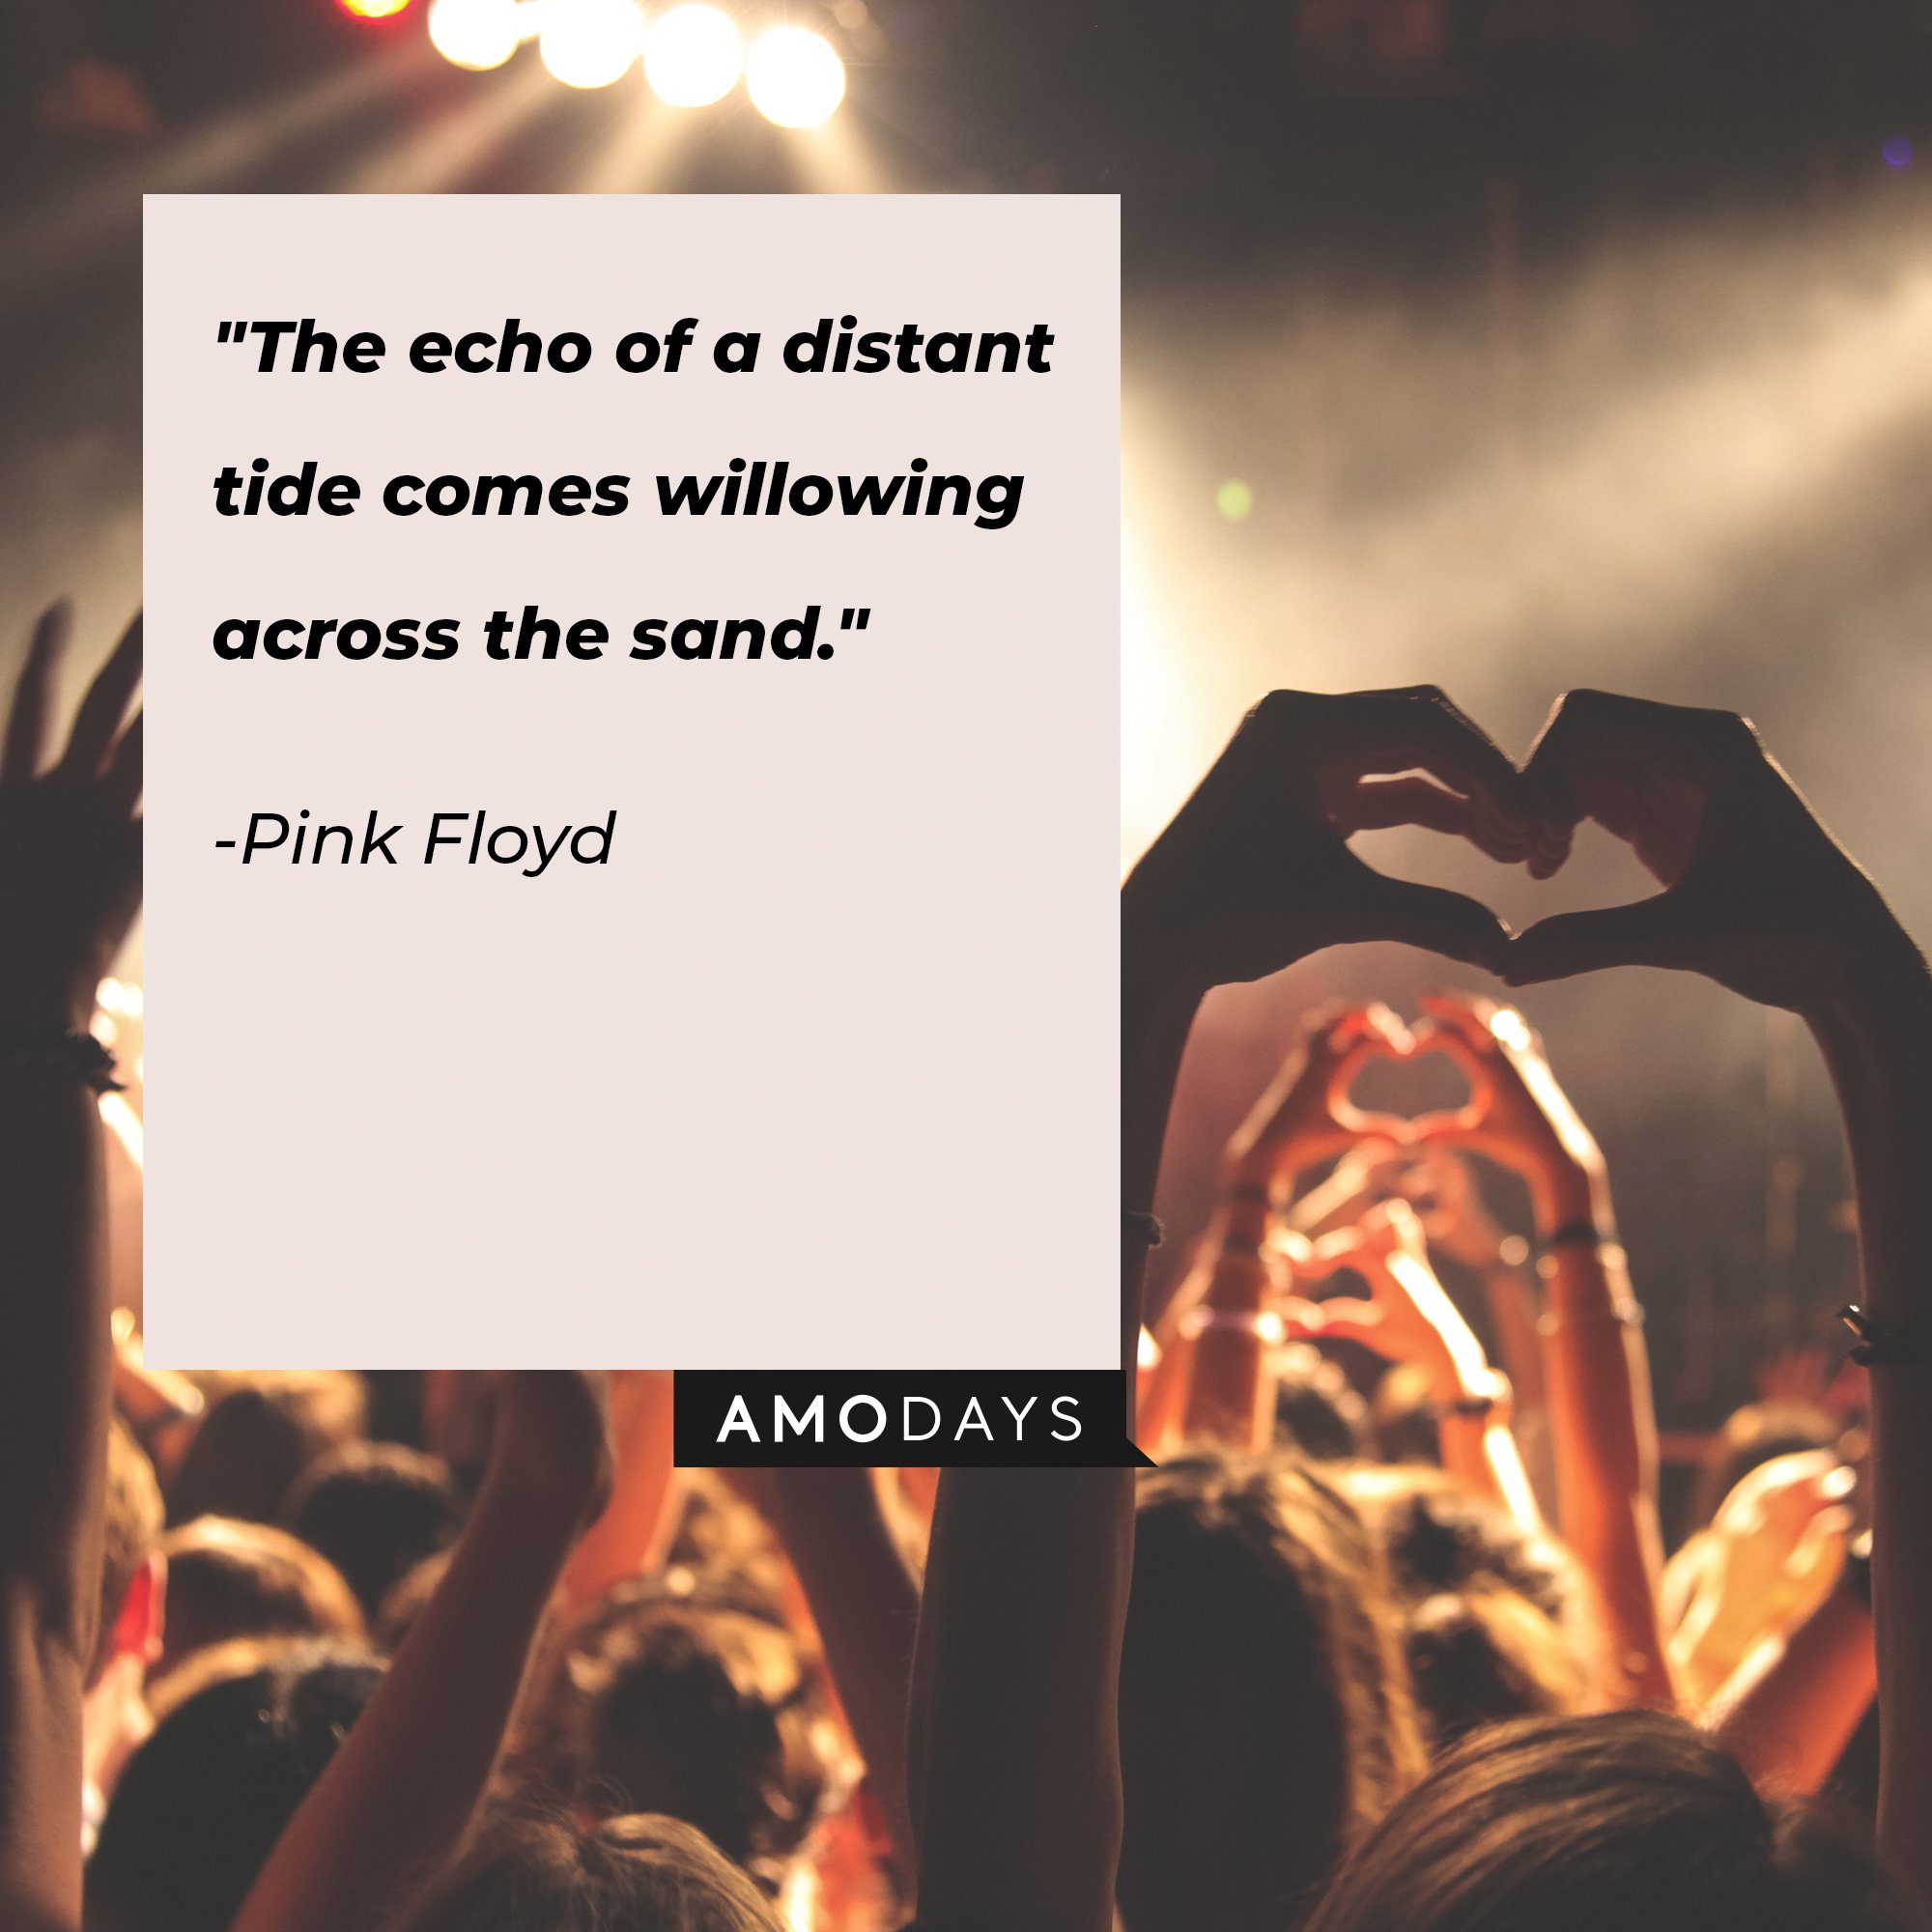 Pink Floyd's "Echoes" quote: "The echo of a distant tide comes willowing across the sand." | Image: AmoDays